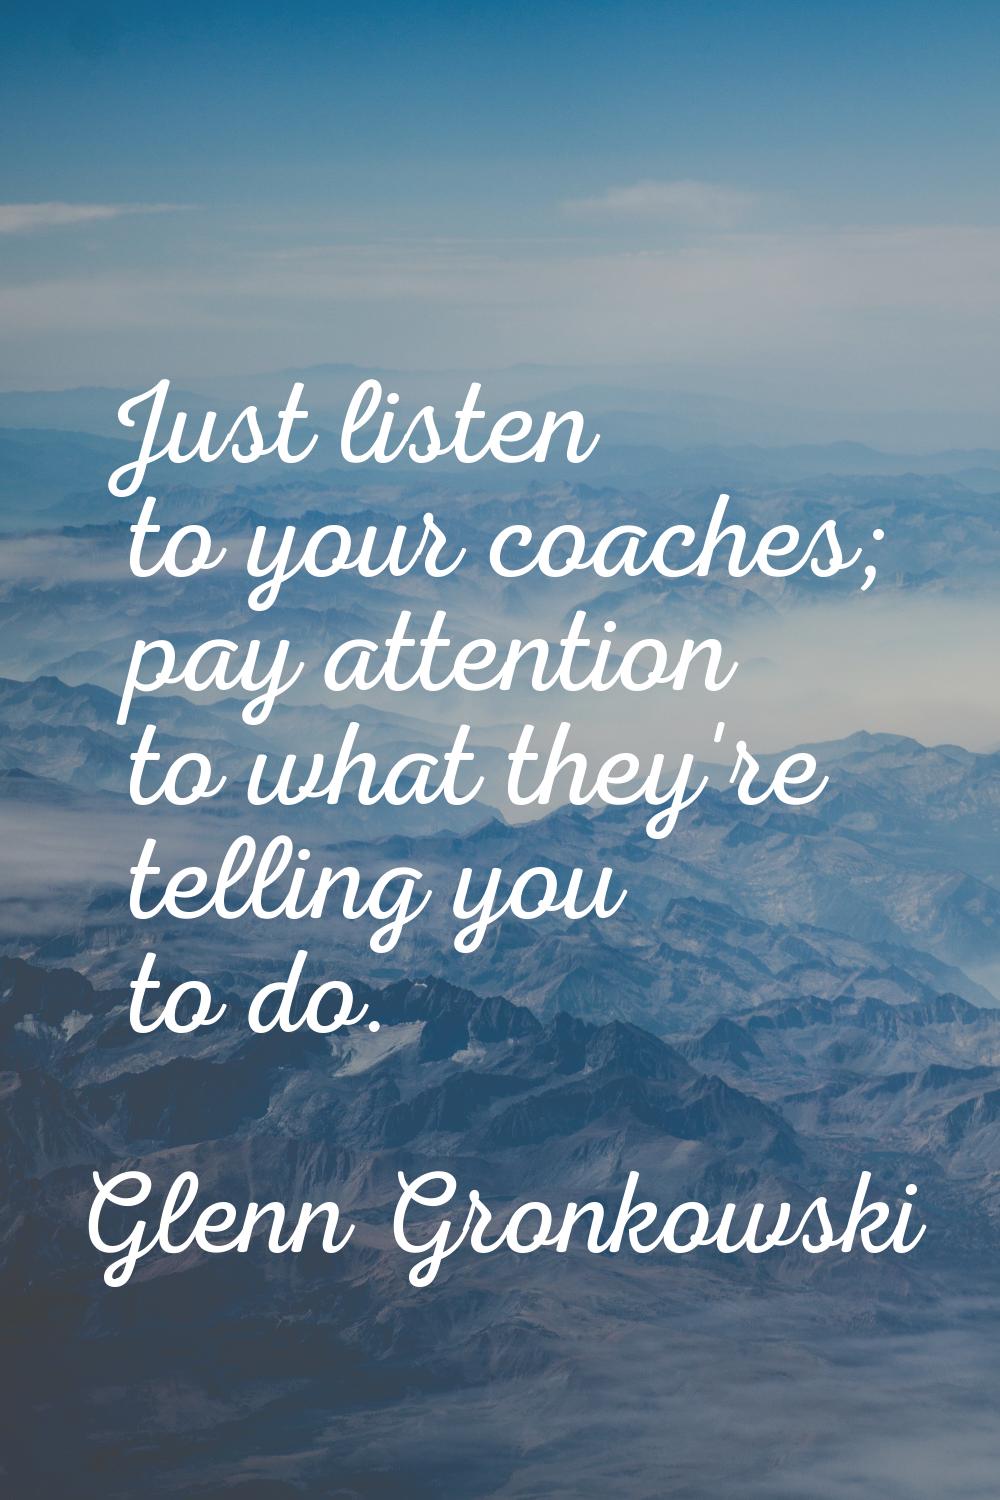 Just listen to your coaches; pay attention to what they're telling you to do.